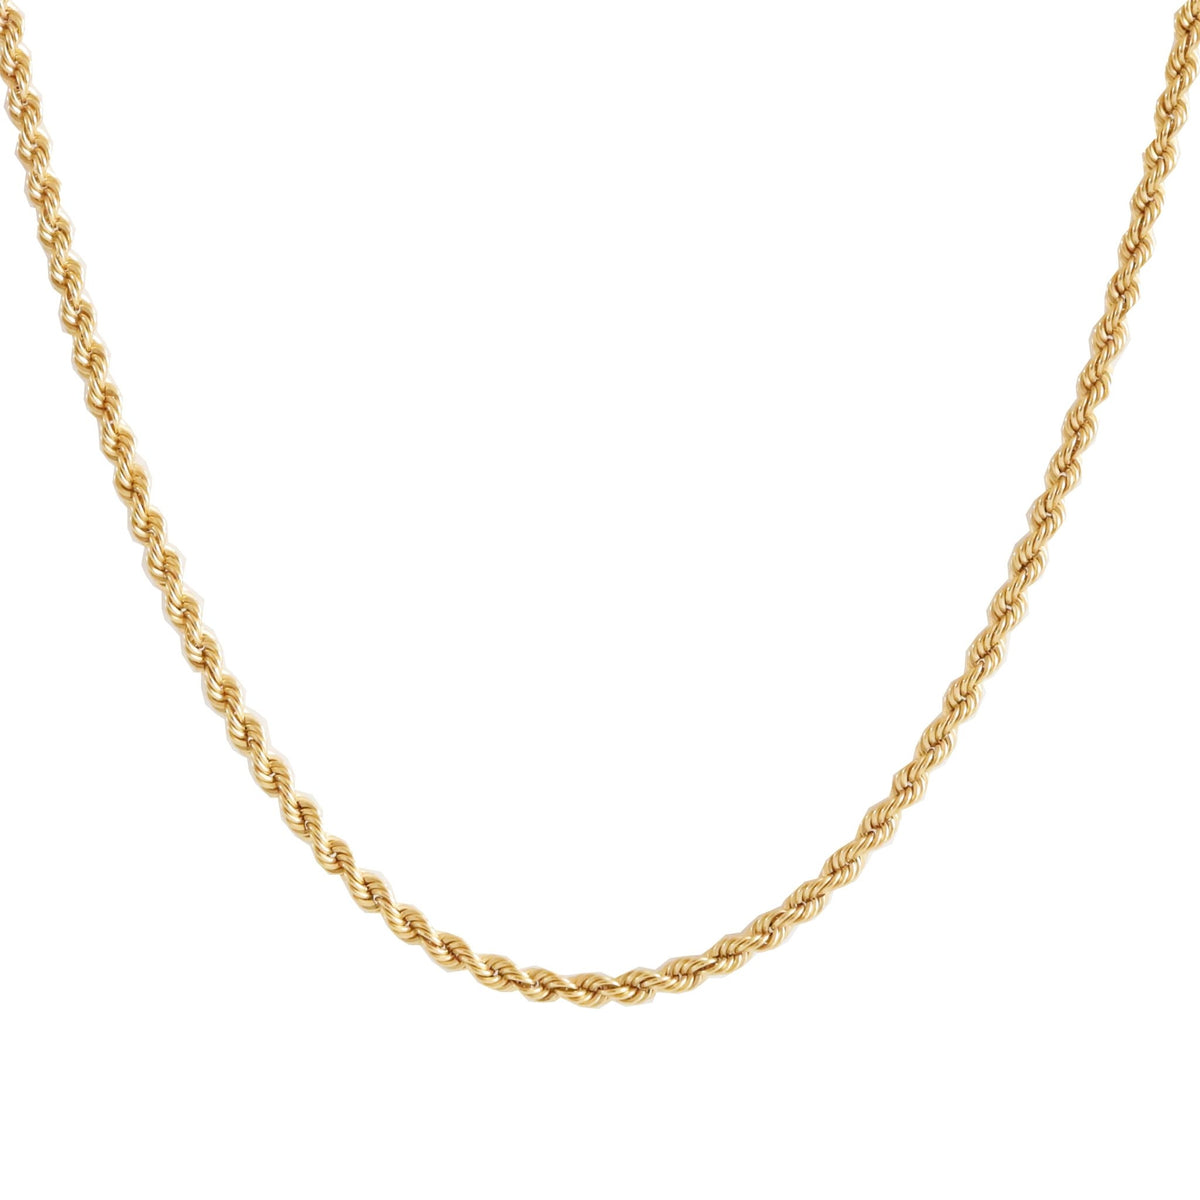 POISE TWISTED ROPE CHAIN 15-17&quot; NECKLACE GOLD - SO PRETTY CARA COTTER